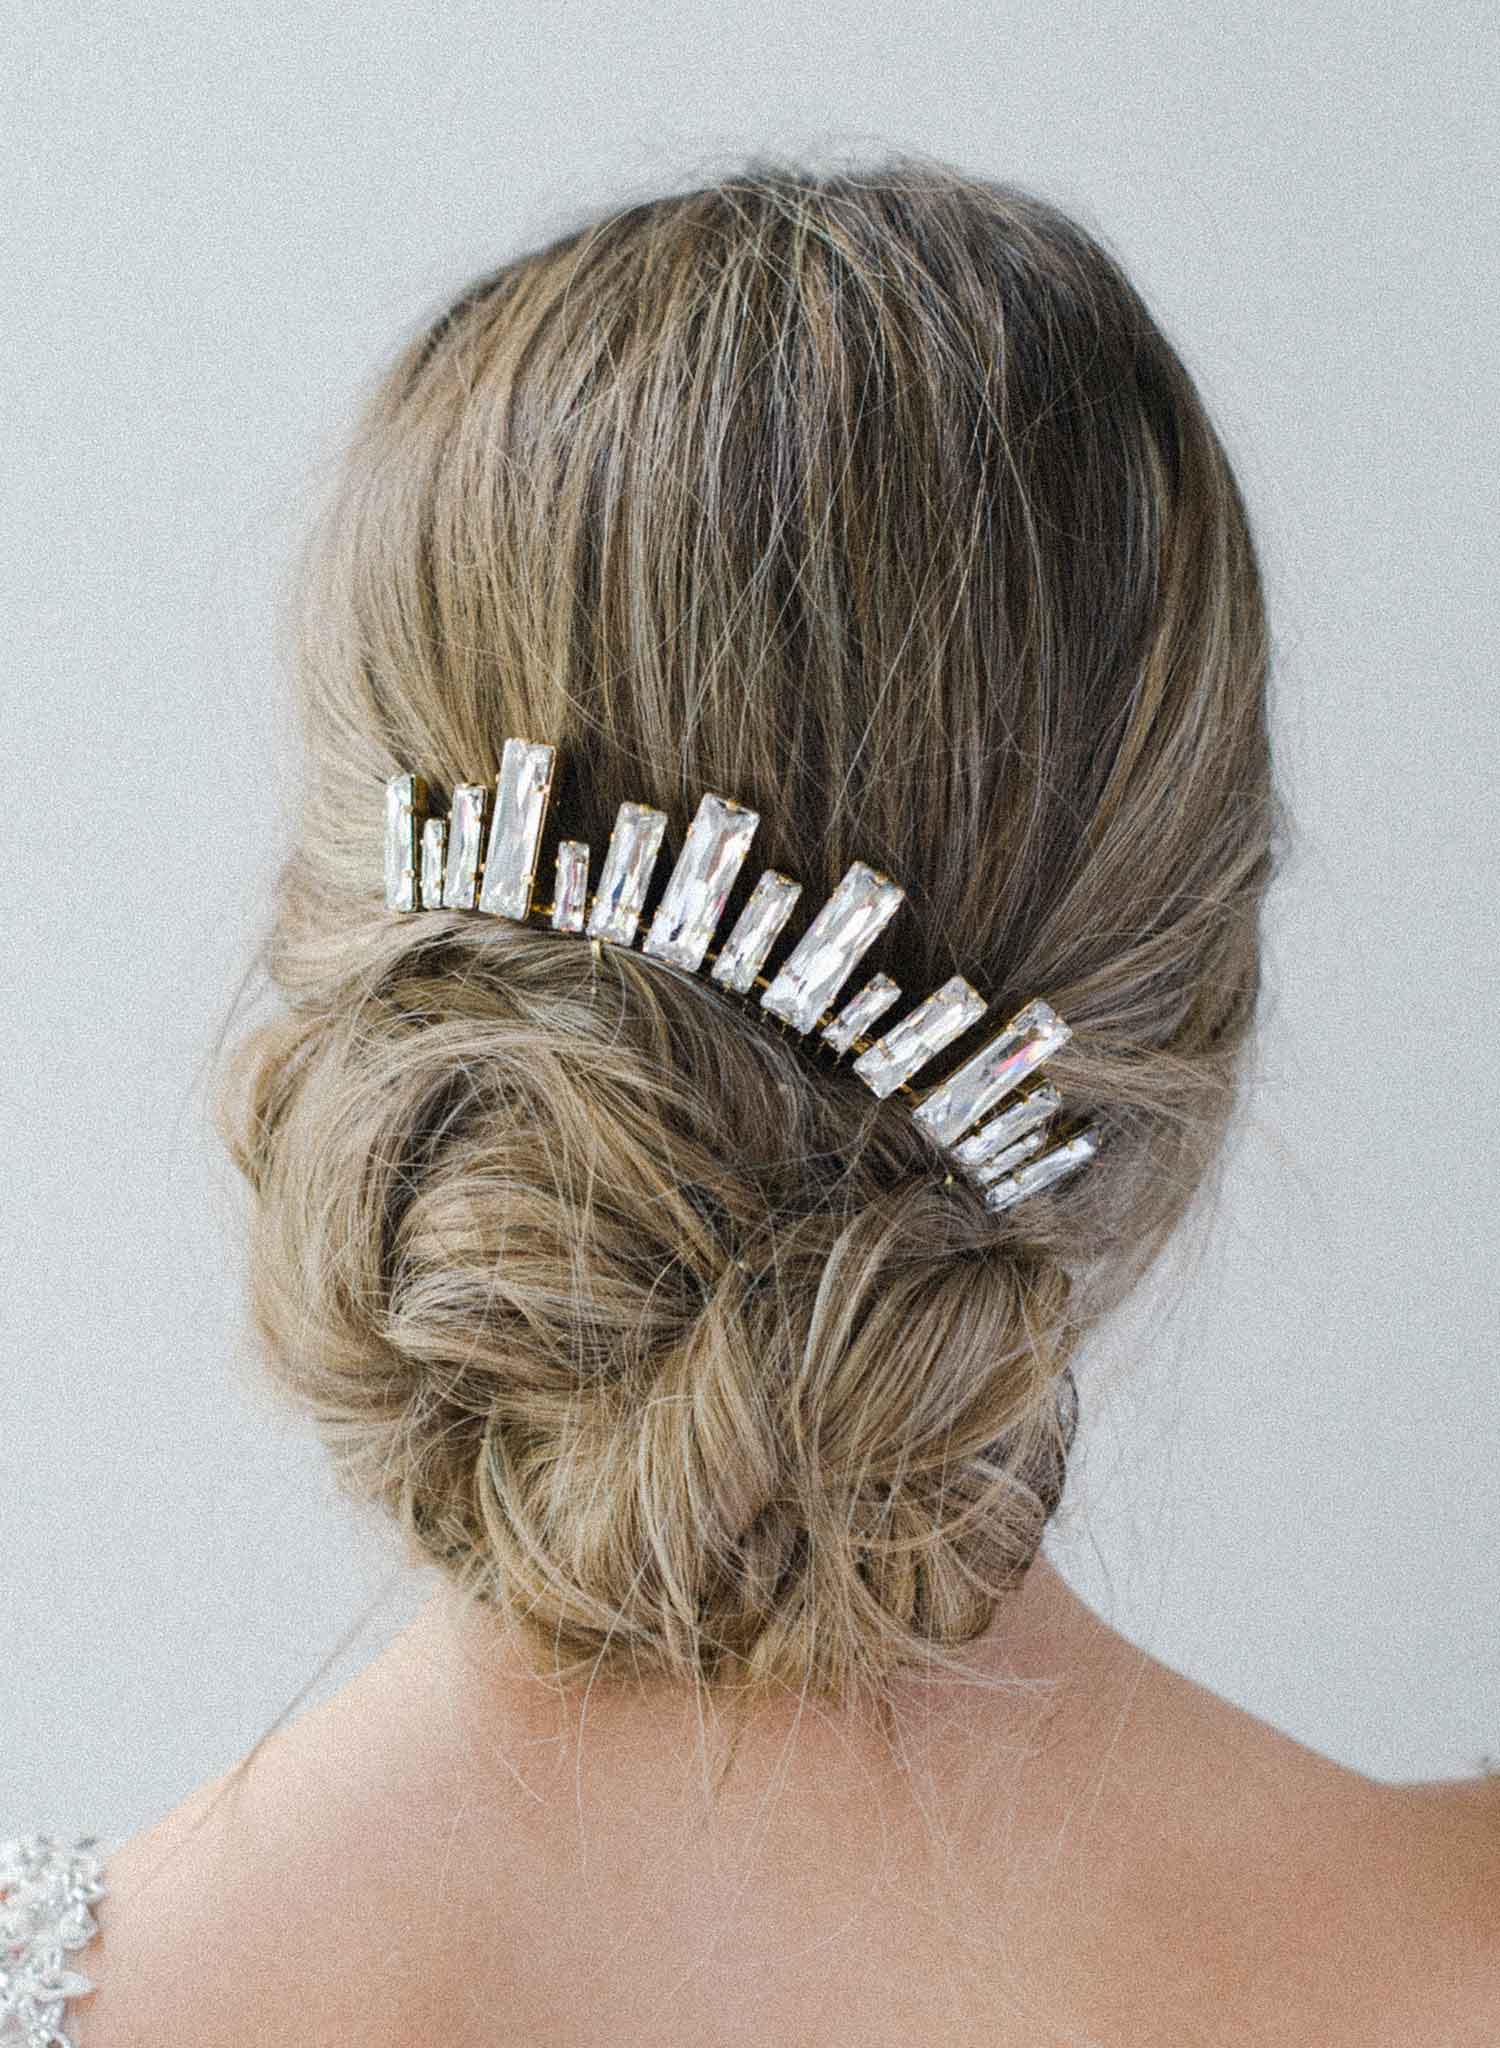 Twigs & Honey Floral Bridal Hair Pins, Florelle - Creamy Blossom Hair Pin Set of 2 - Style #925